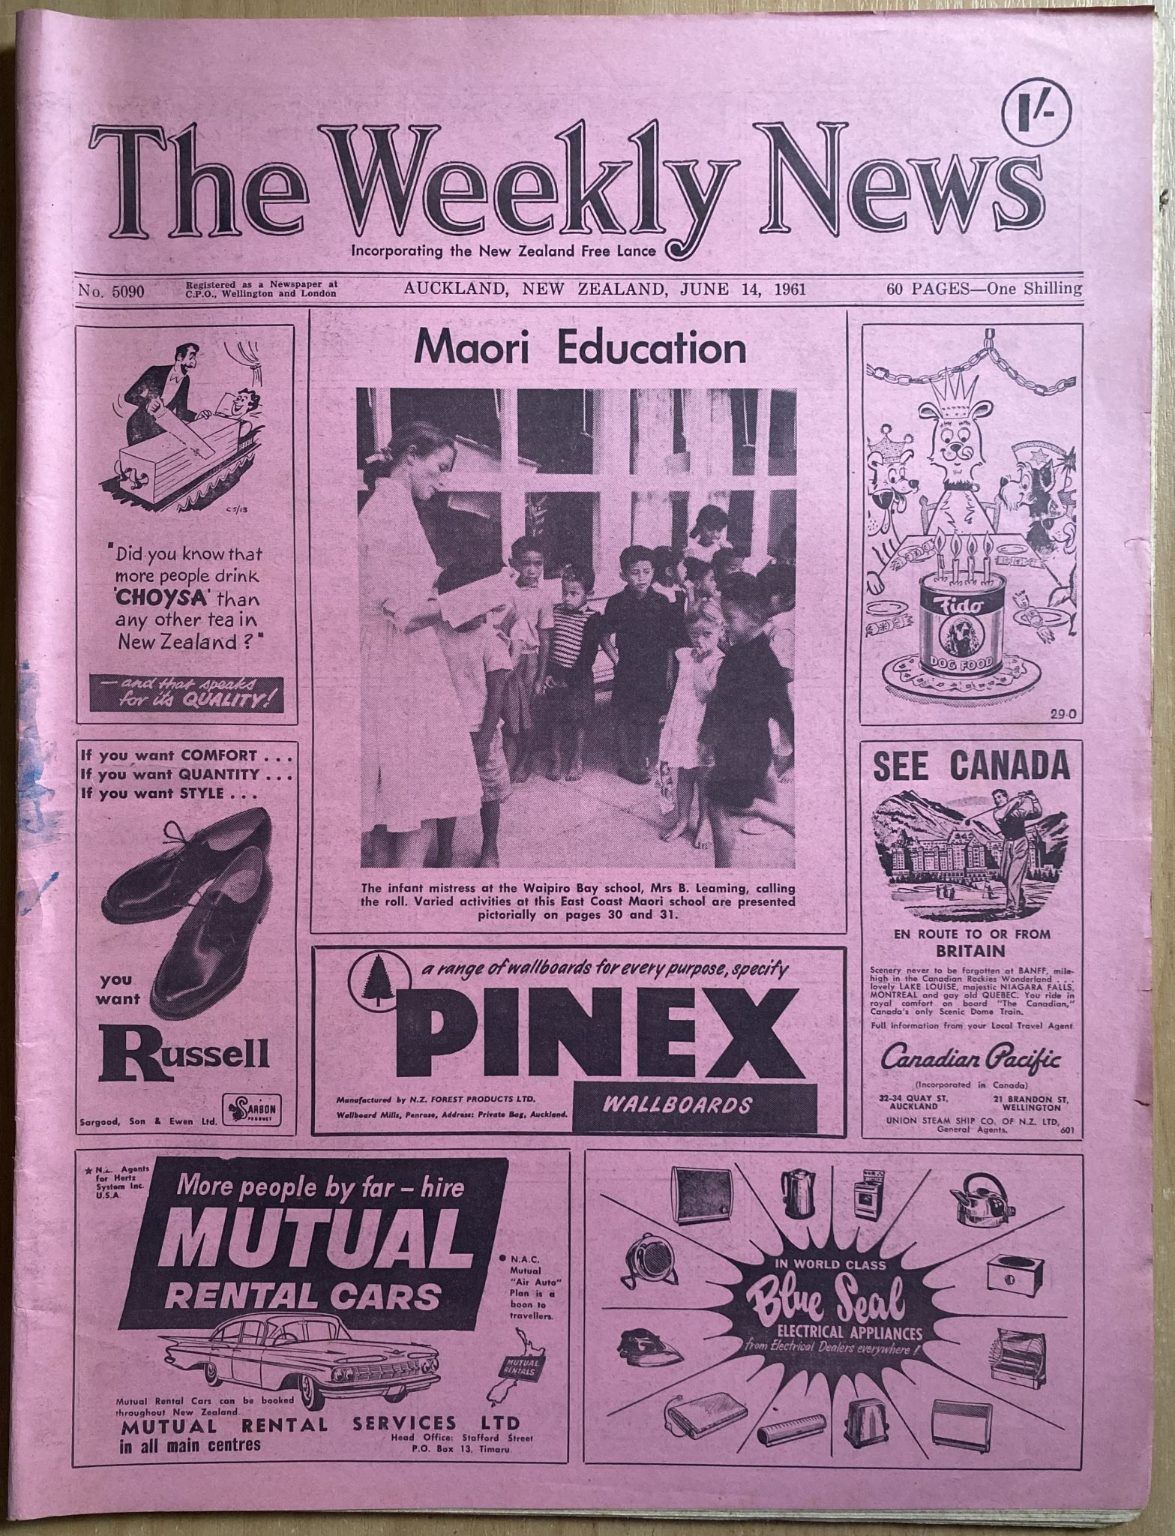 OLD NEWSPAPER: The Weekly News, No. 5090, 14 June 1961